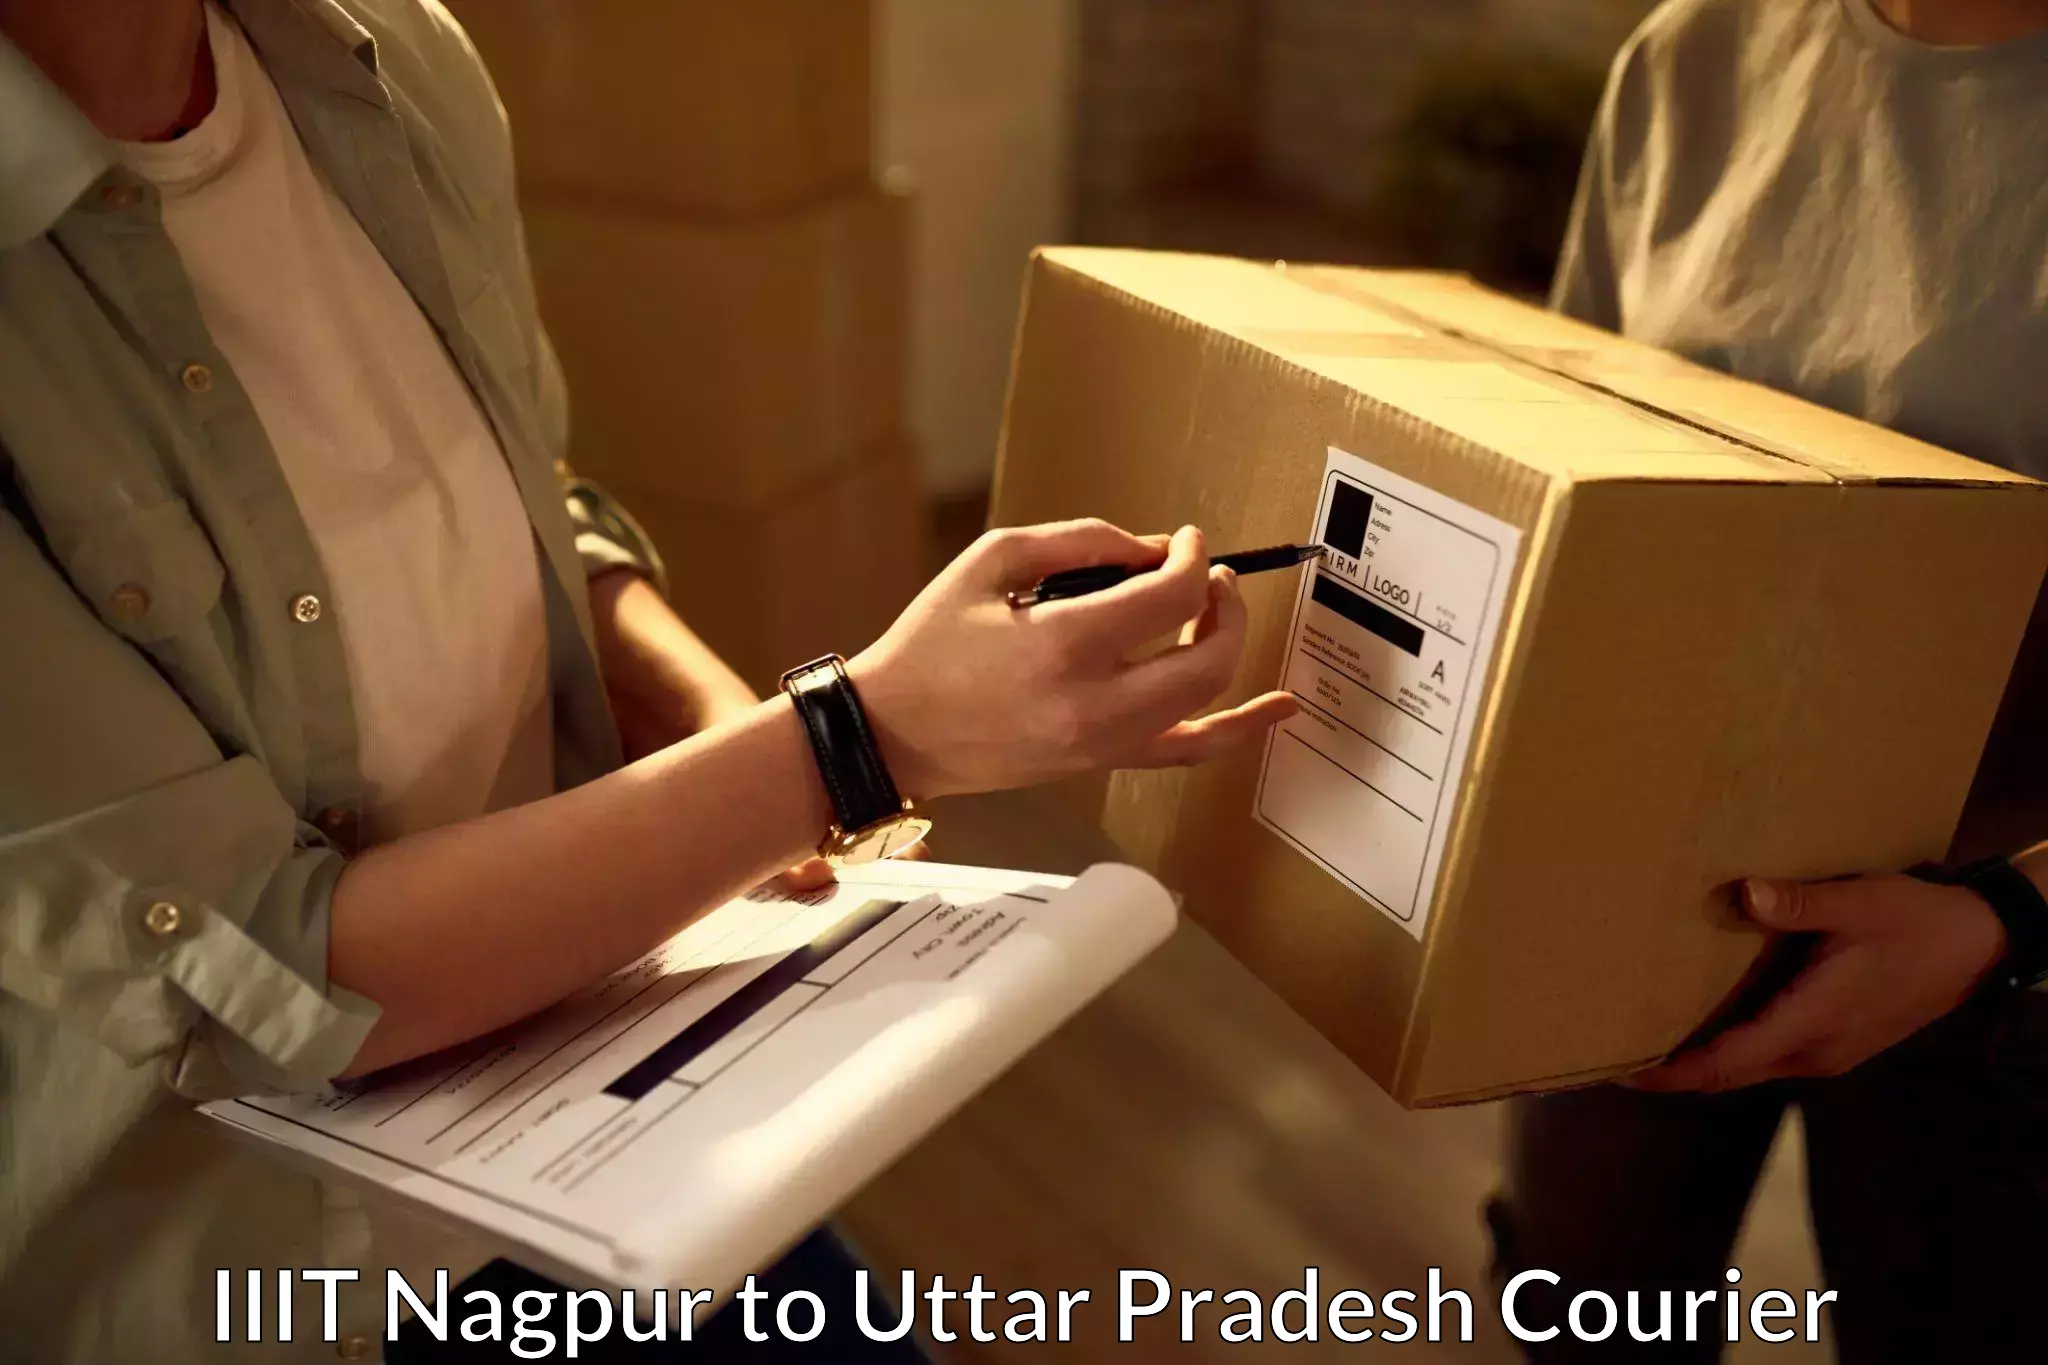 Cash on delivery service IIIT Nagpur to Shohratgarh